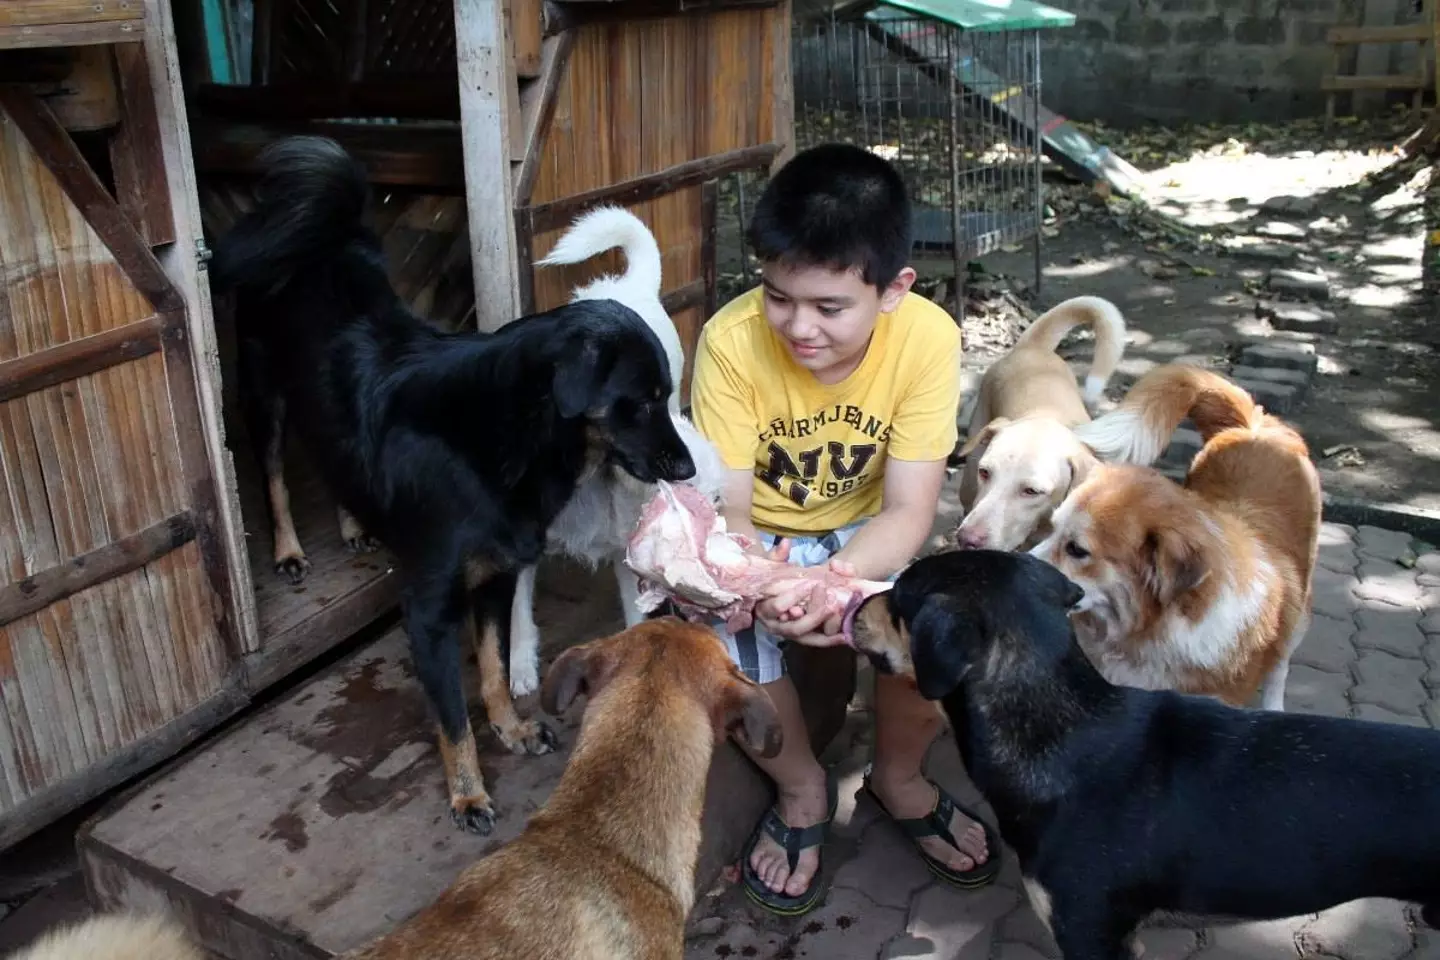 He spotted Ken feeding a group of stray dogs.